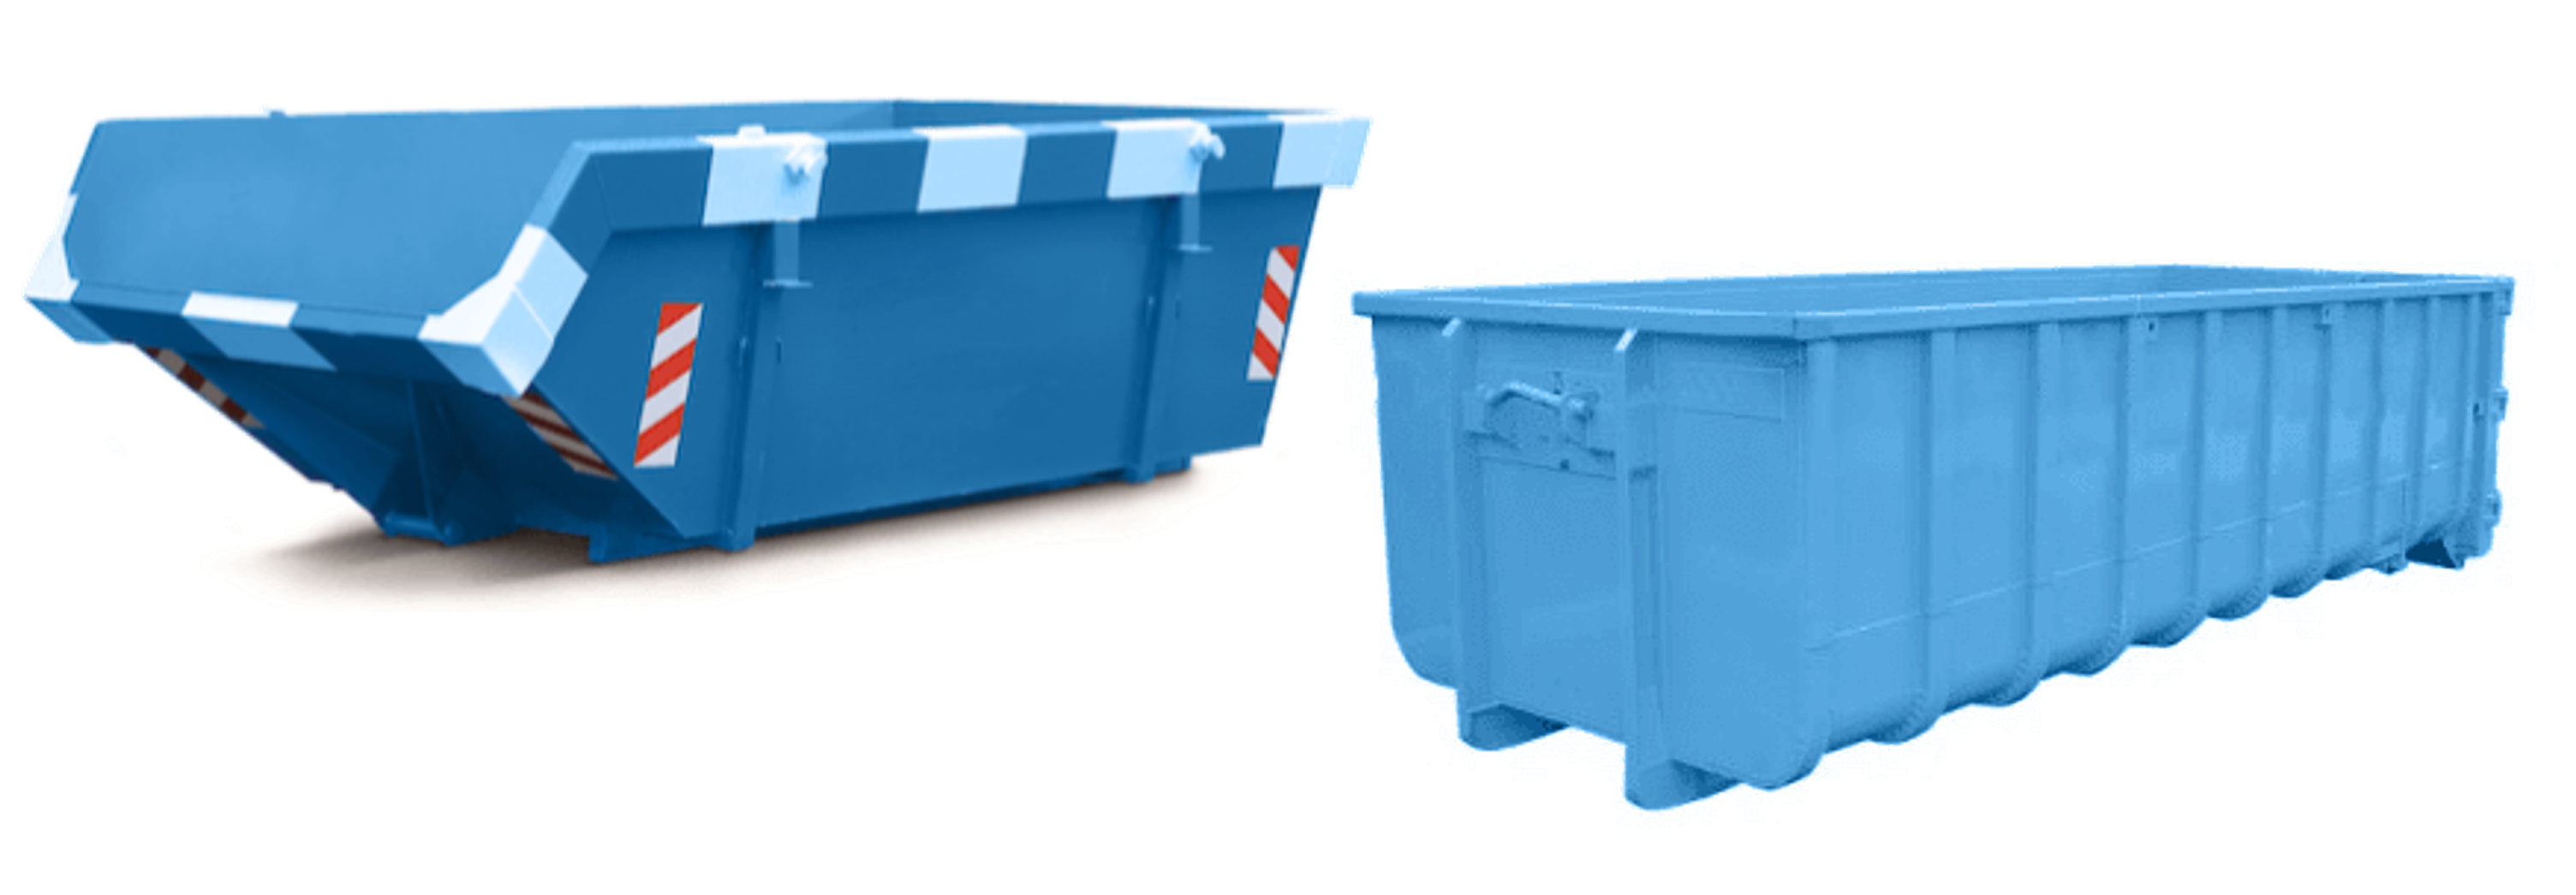 Open_steel-Construction-Waste-Container